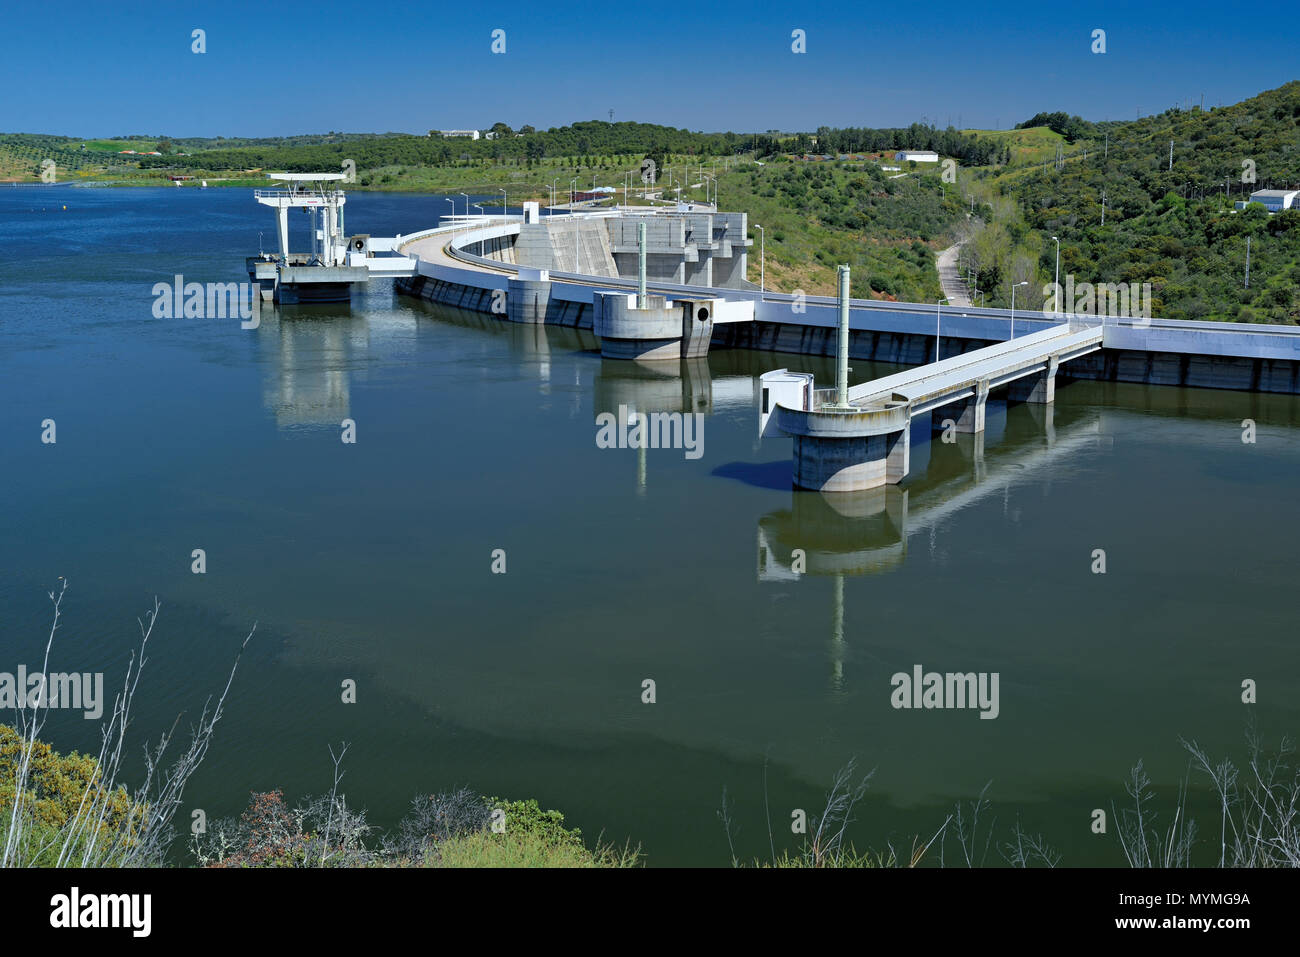 Engineering construction of Hydroelectric dam Stock Photo